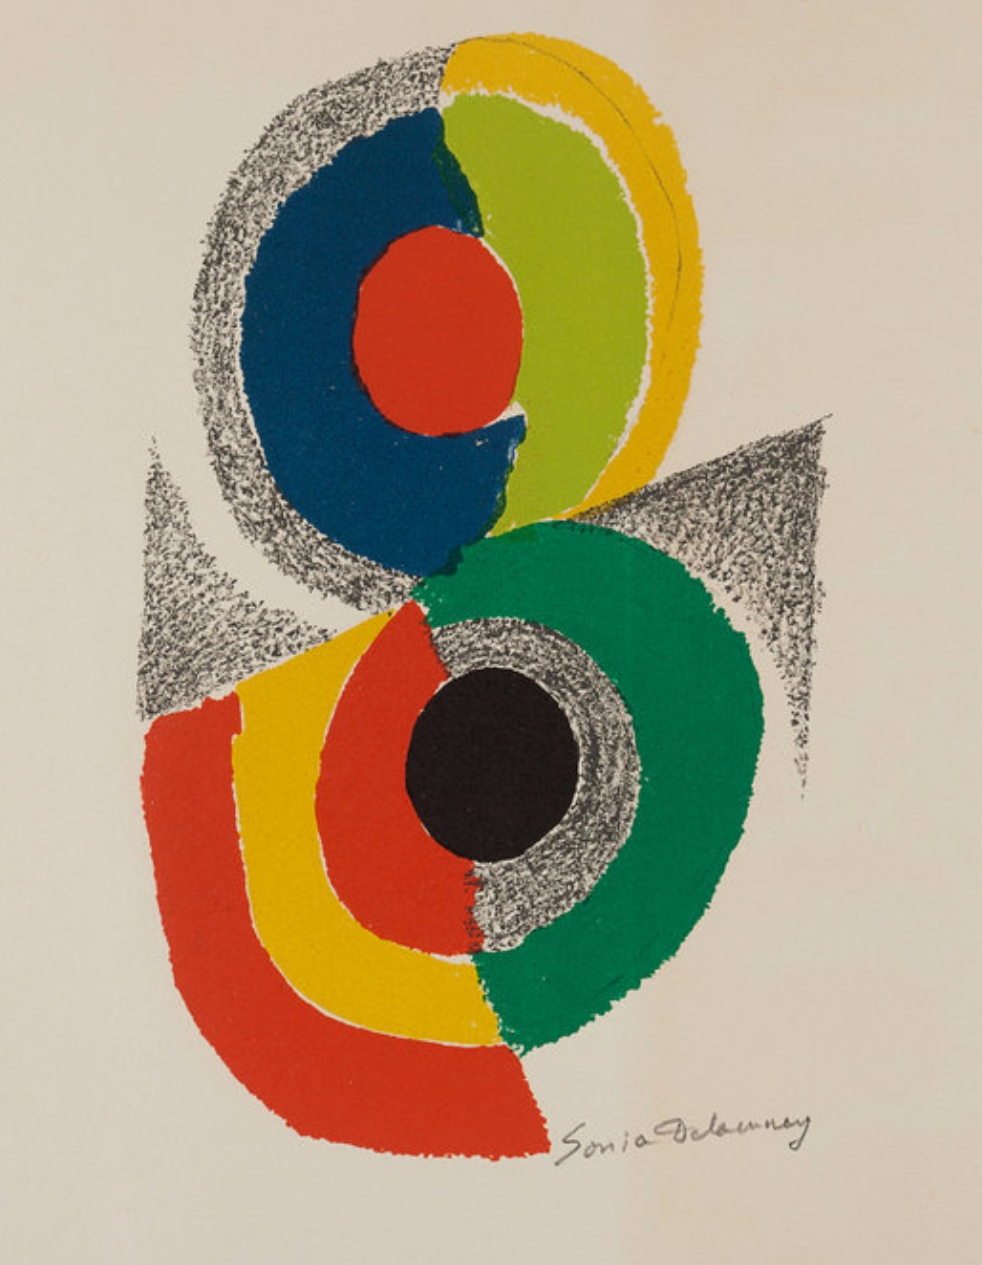 Sonia DELAUNAY - Rhythms and colors, 1971 - Original lithograph signed ...